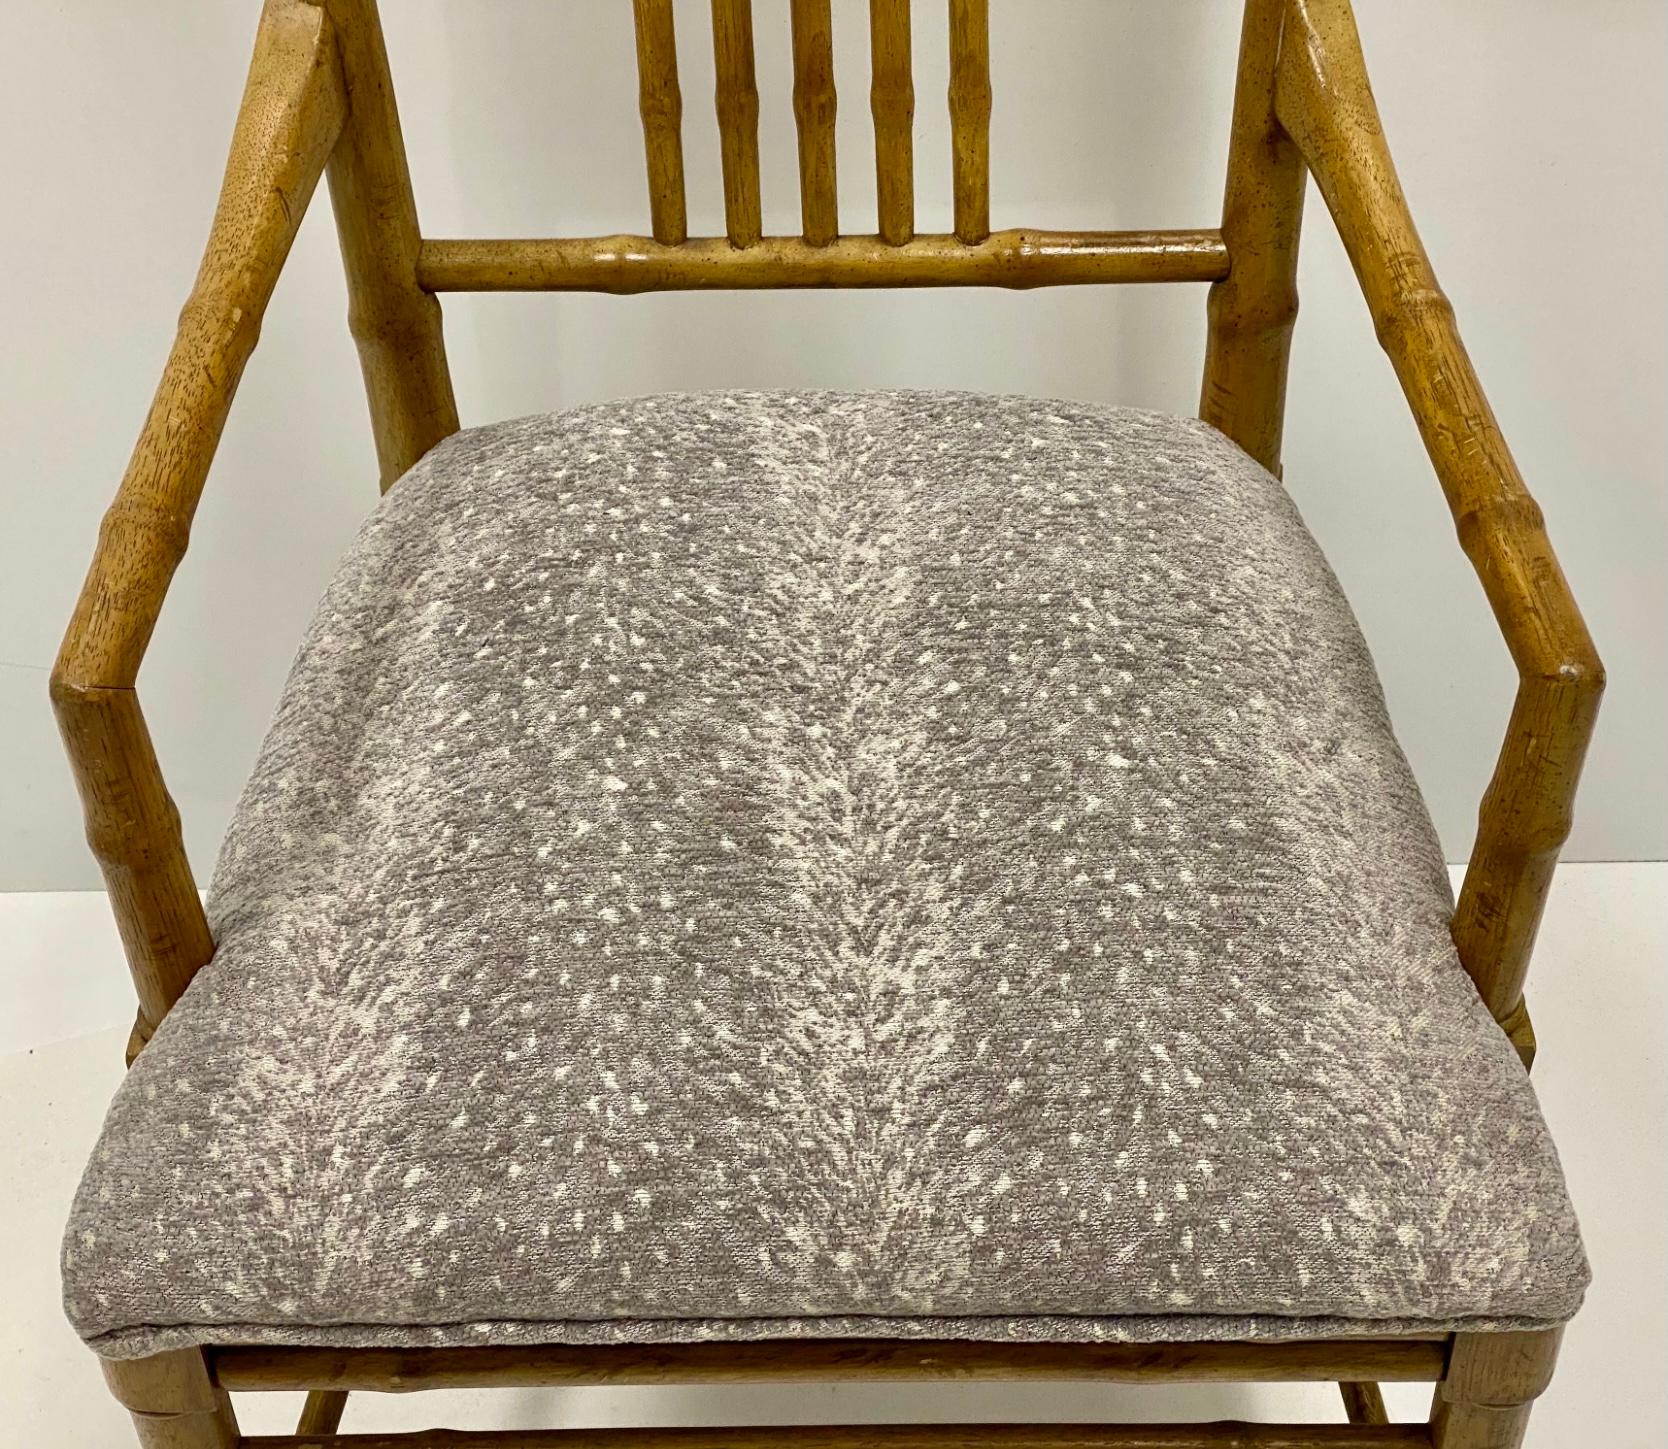 20th Century 1970s Regency Style Faux Bamboo Bergere Armchairs In Grey Fawn Upholstery -Pair For Sale